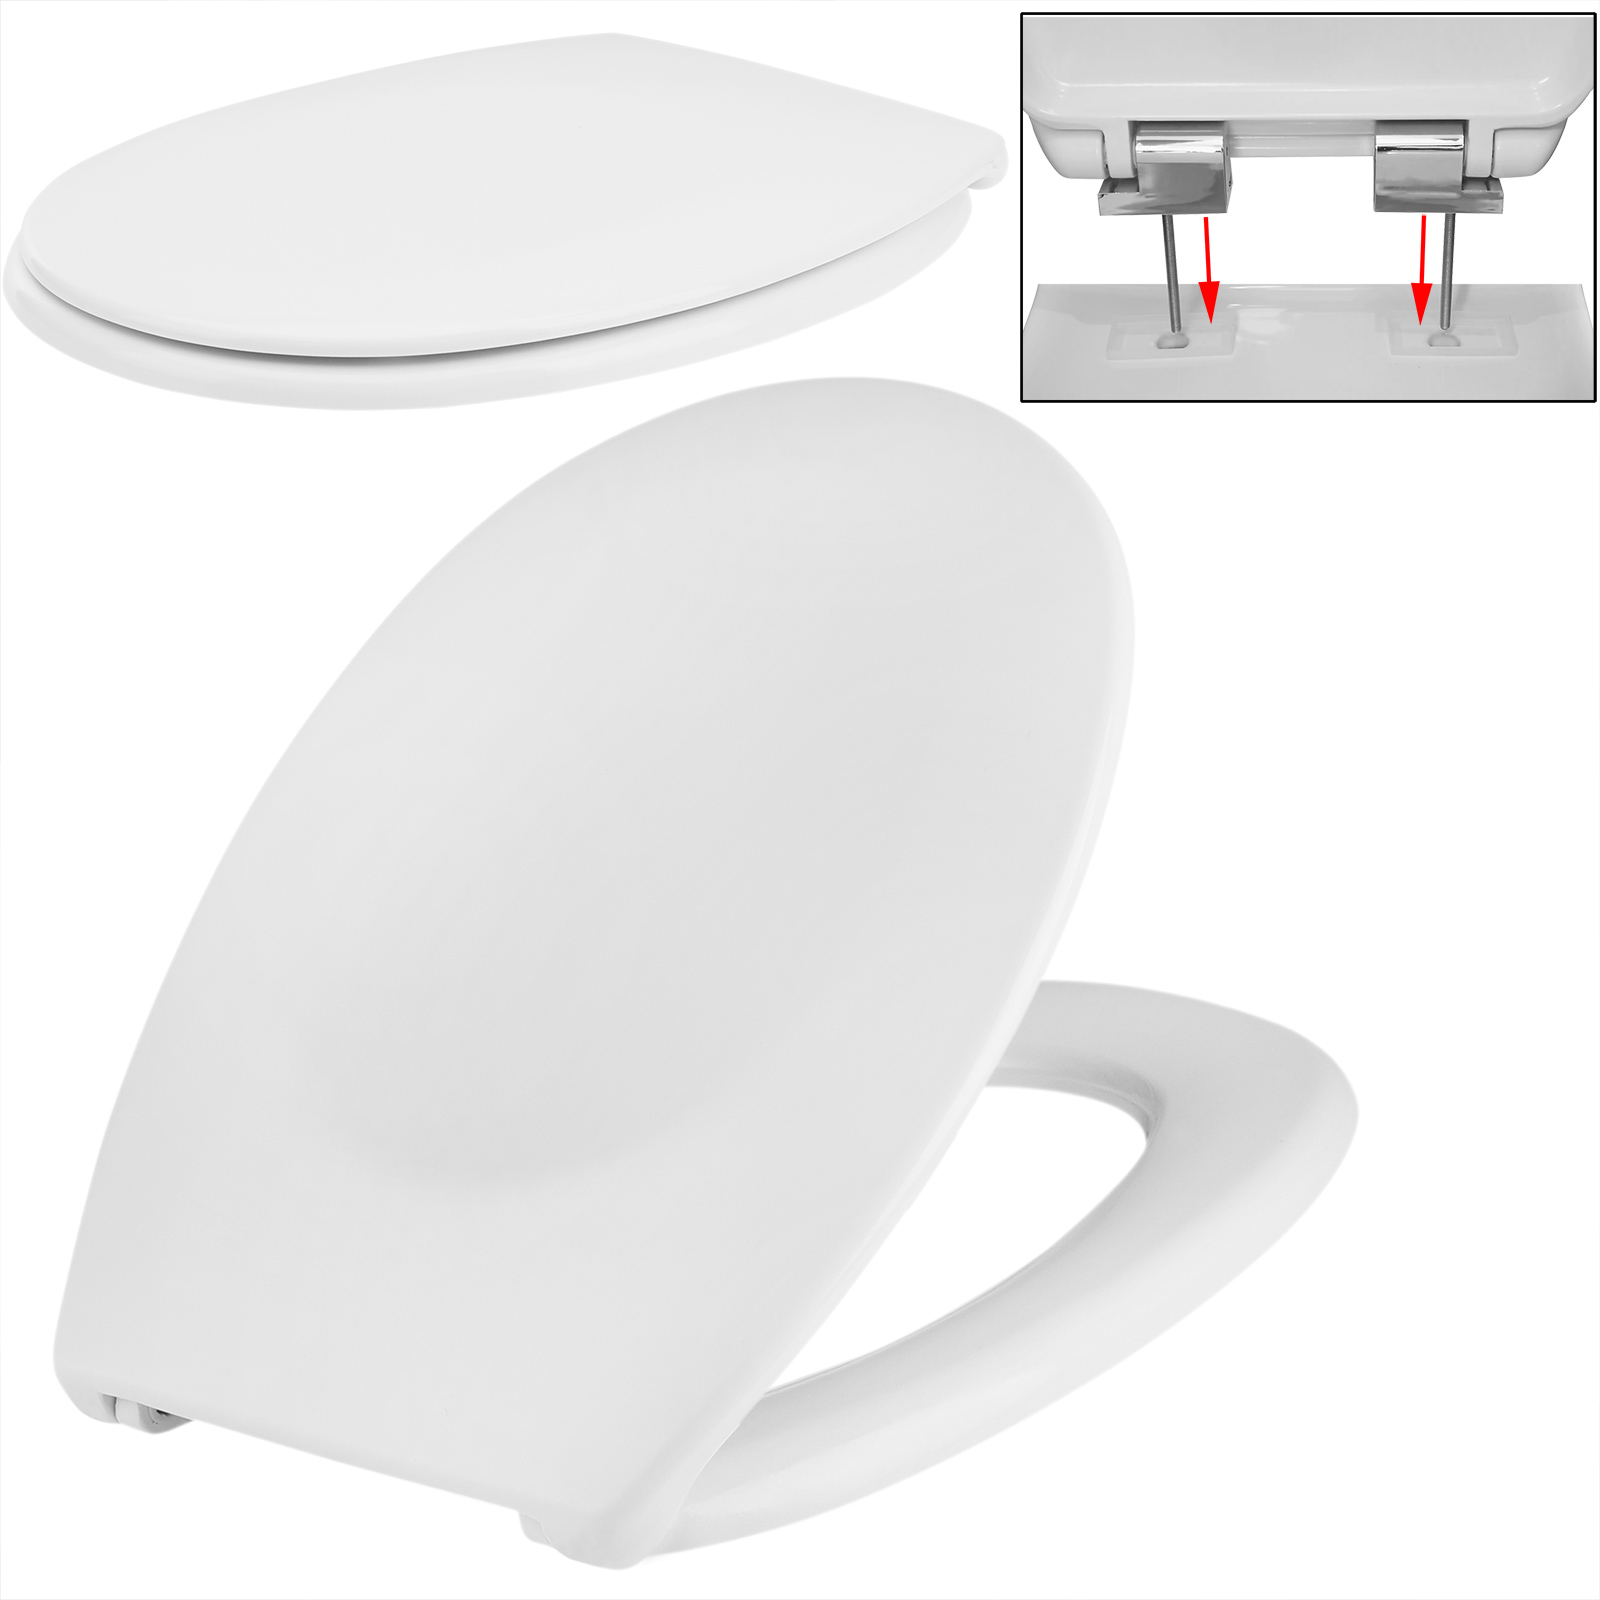 Deuba Soft Close Toilet Seat White Strong Hinges Fittings Easy Installation Cleaning Durable Slow Lid Cover Loo Bathroom